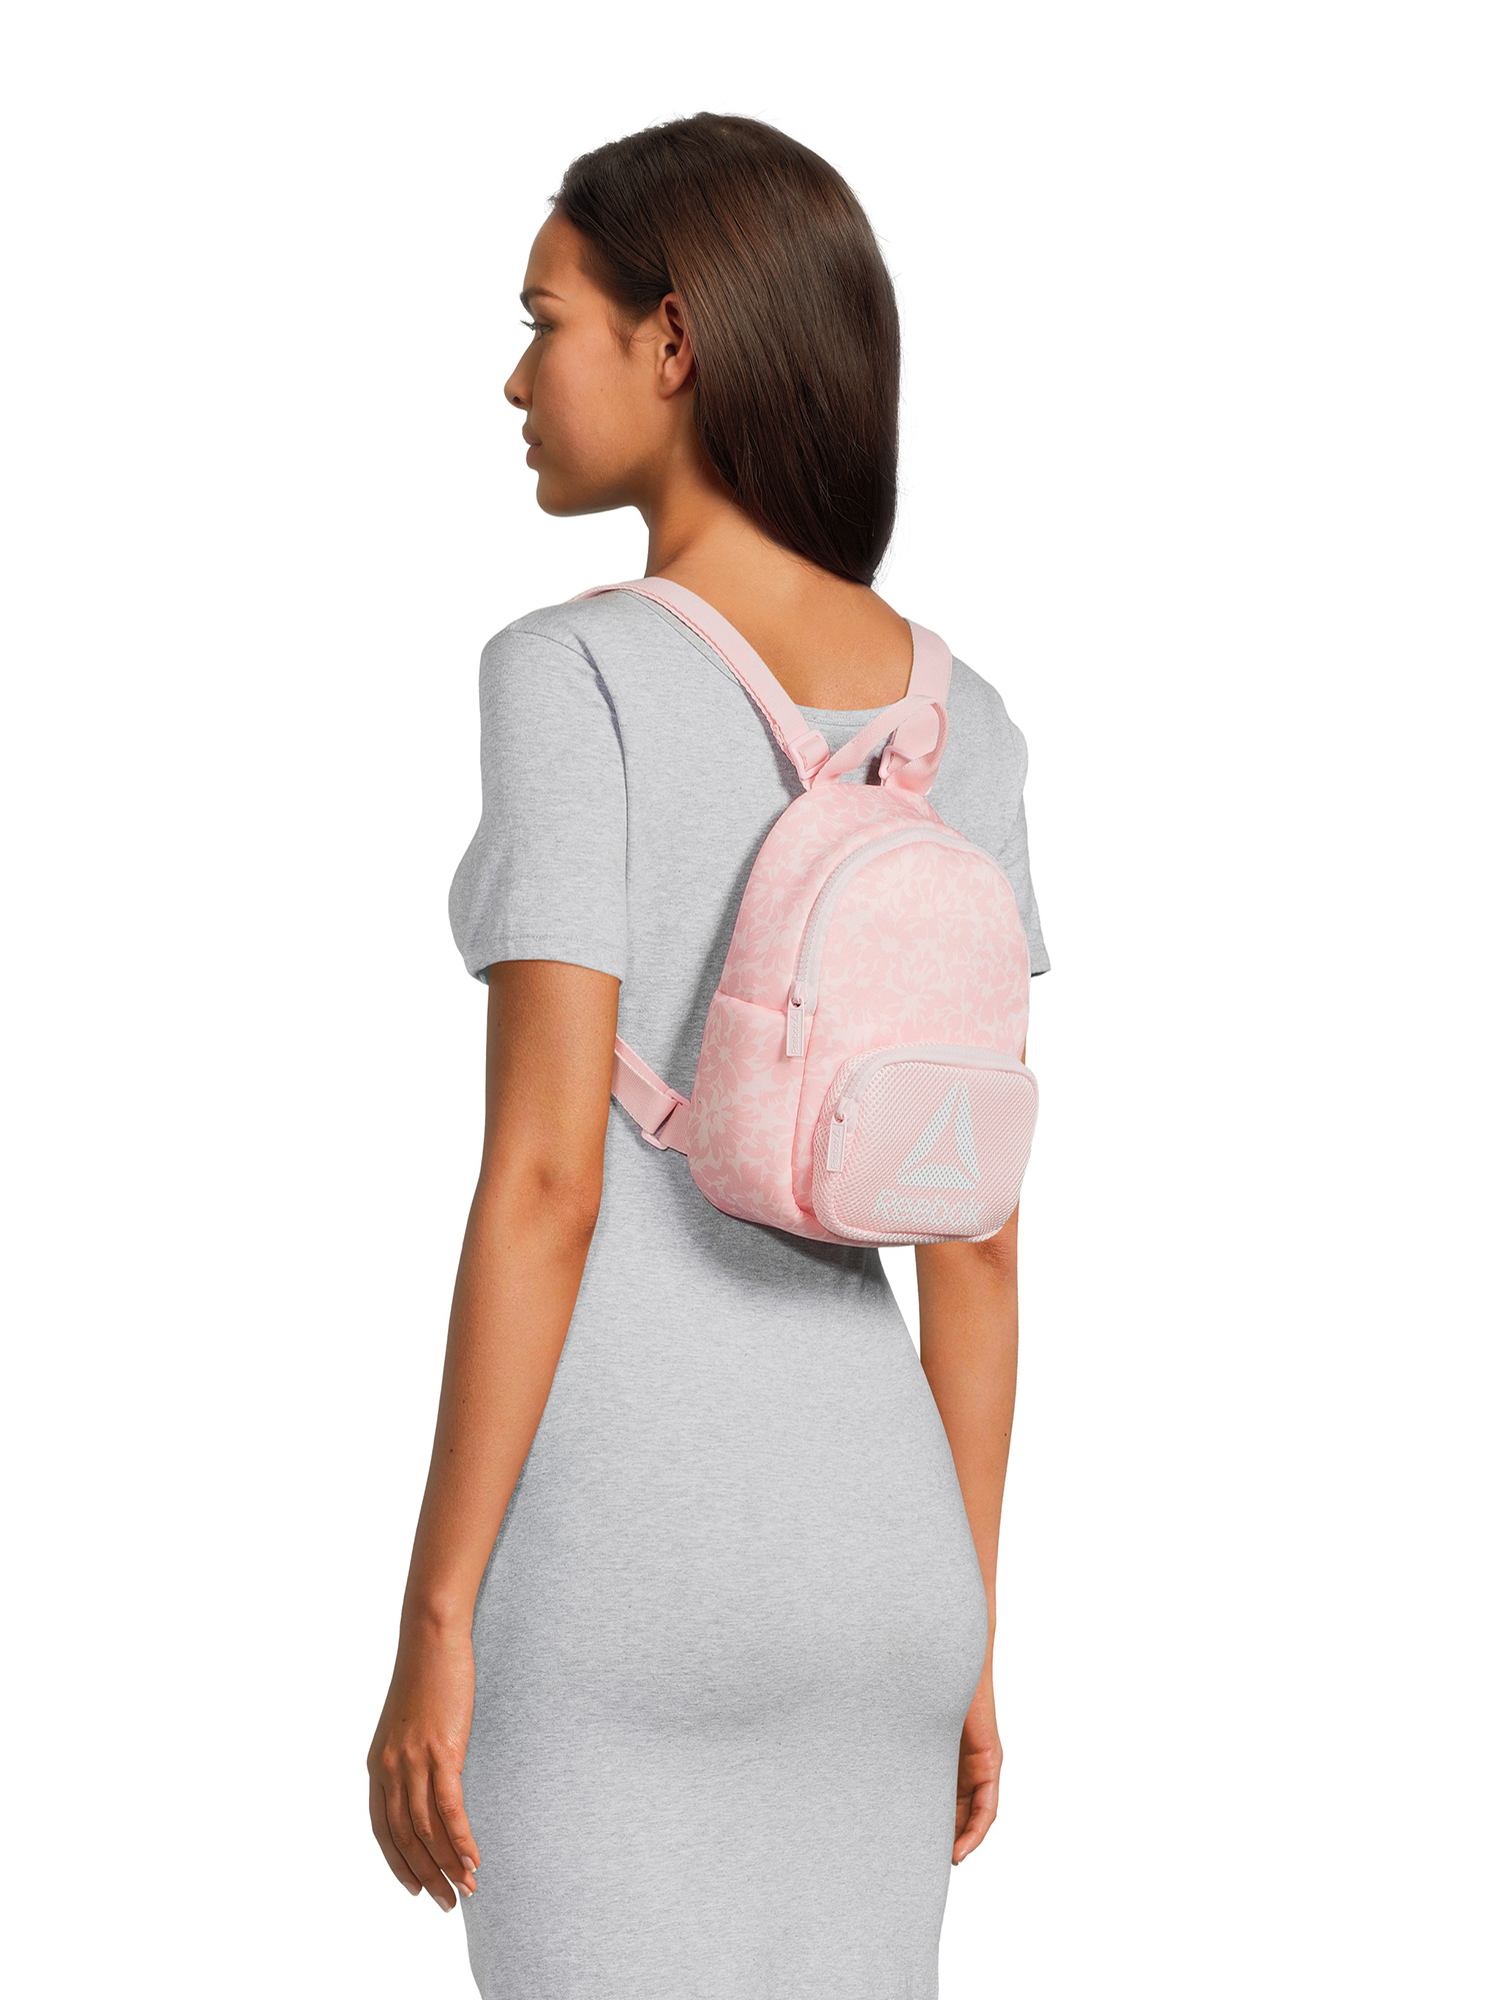 Reebok Women’s Molly Mini Backpack, Rose Daisies - image 2 of 5